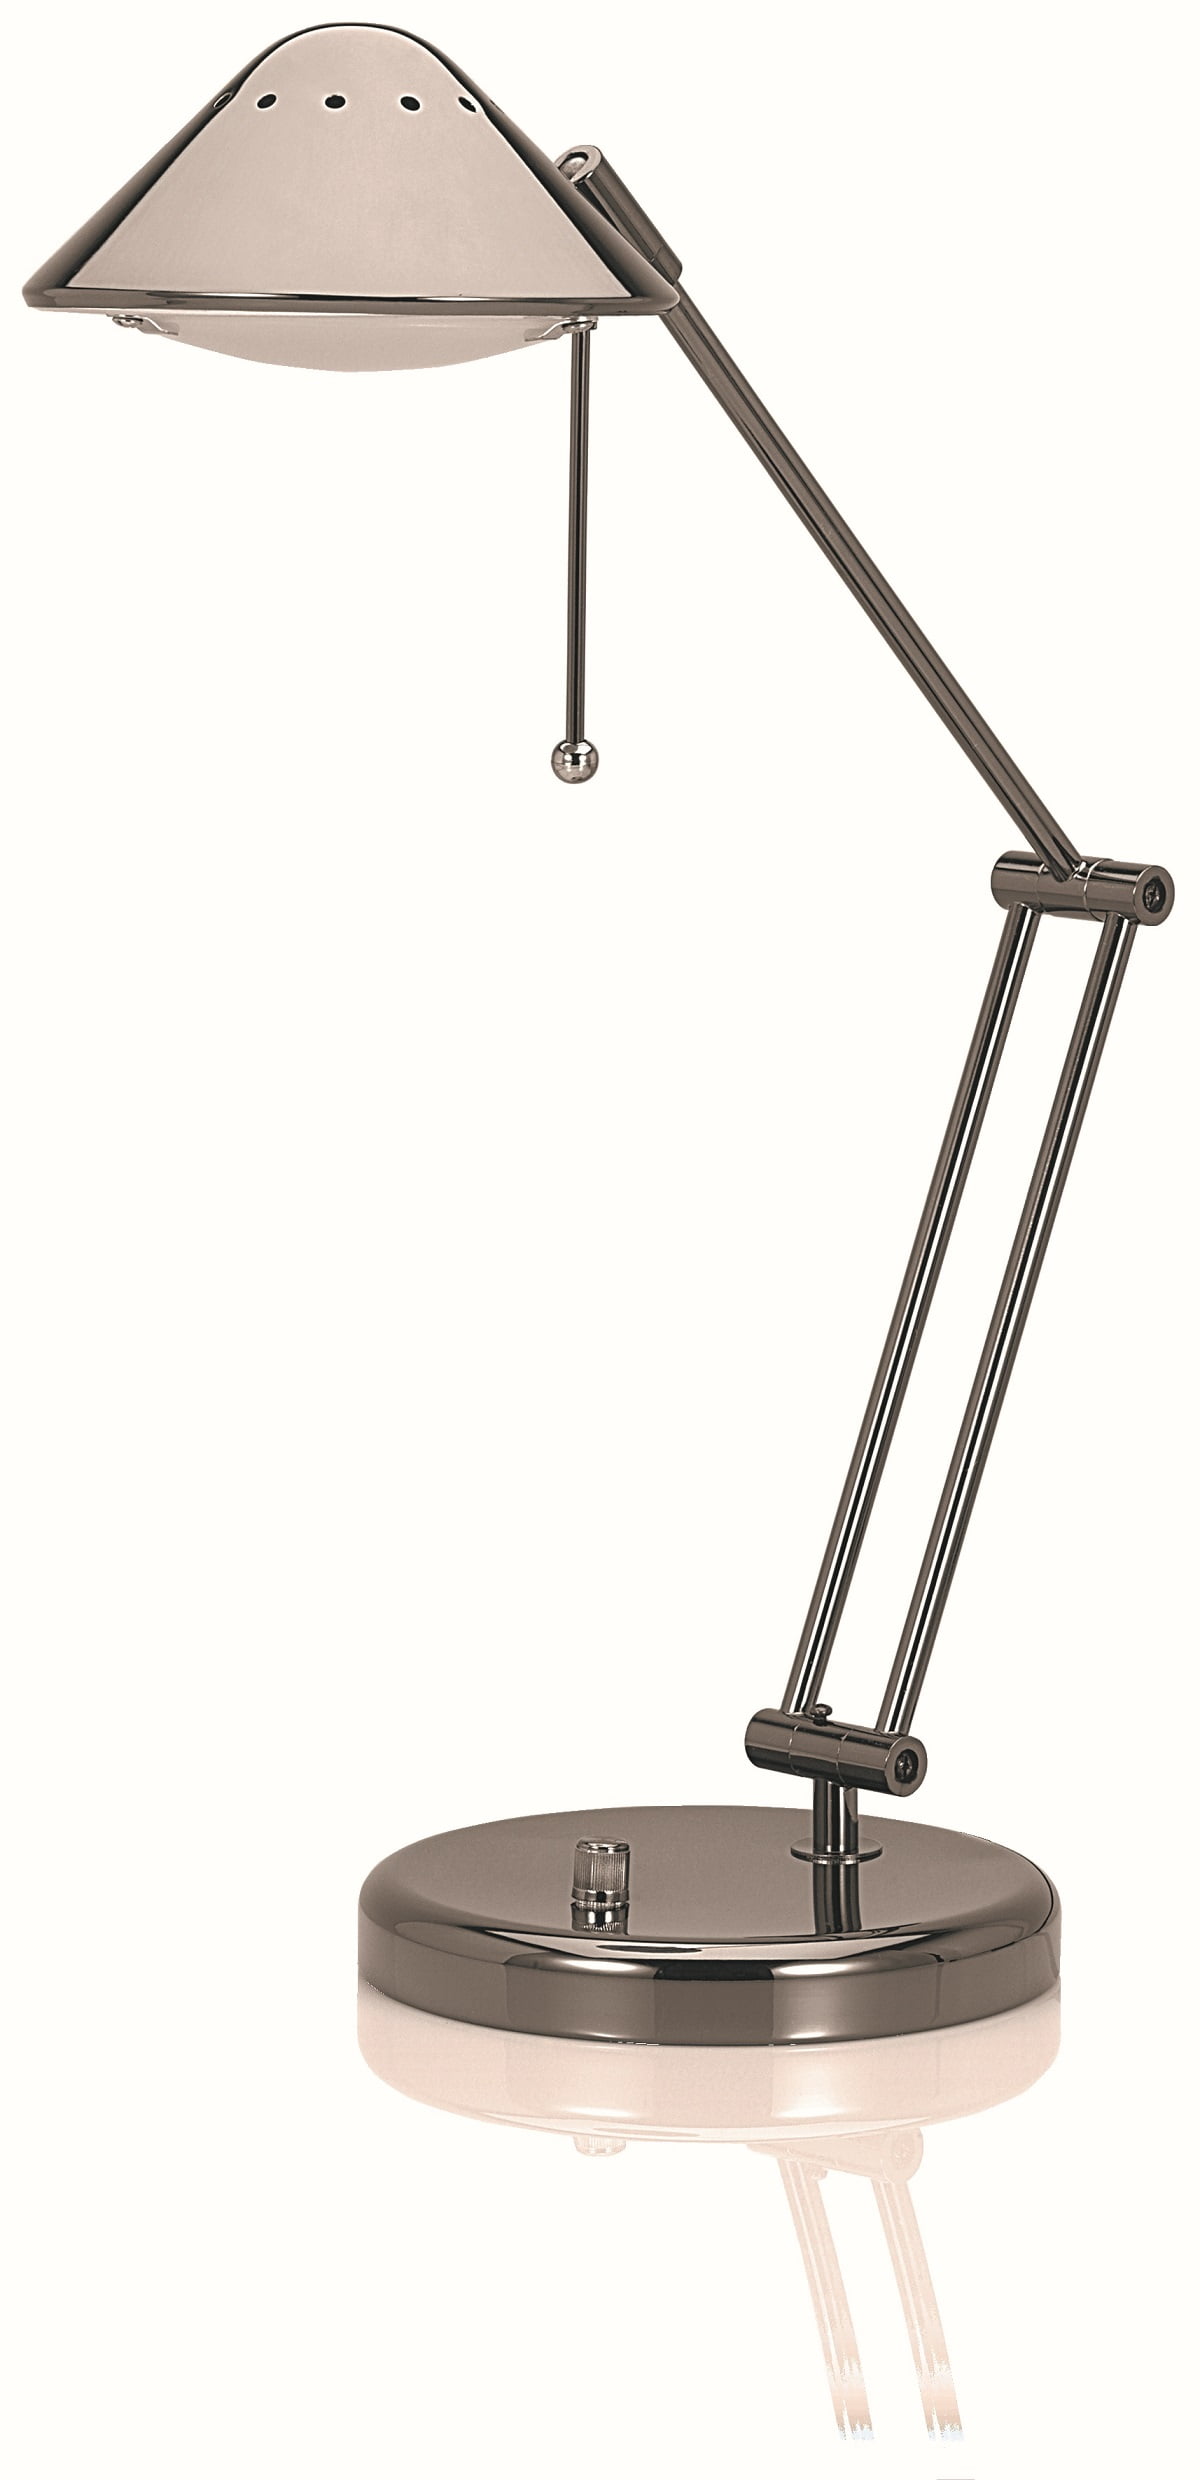 V-LIGHT Halogen Desk Lamp with 3-Point Adjustable Arm and Dimmer Switch